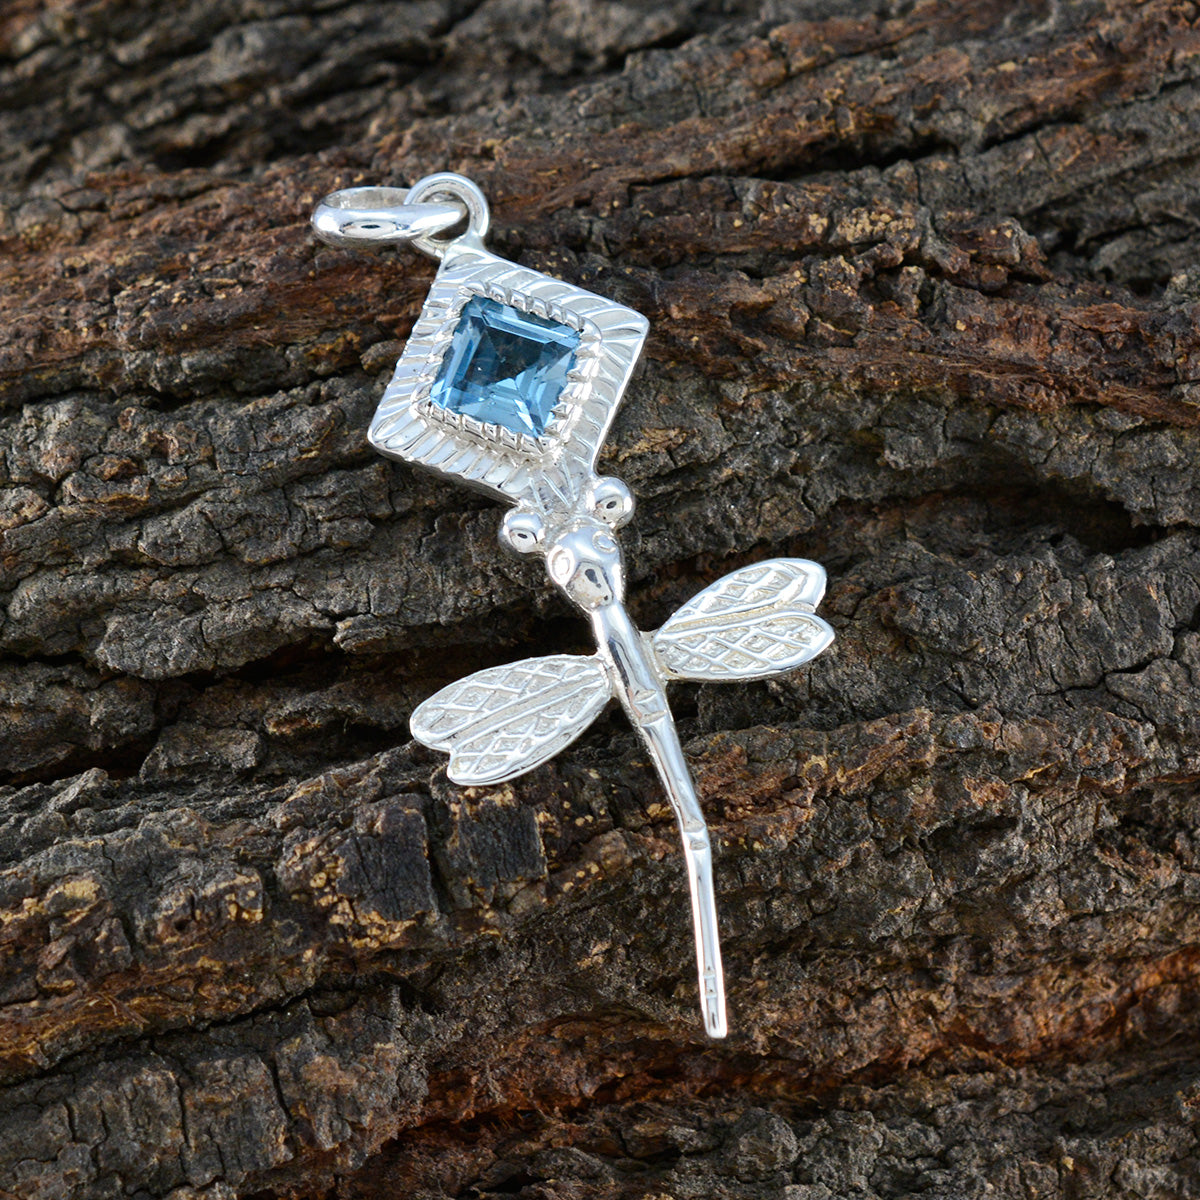 Riyo Nice Gems Square Faceted Blue Blue Topaz Silver Pendant Gift For Wife